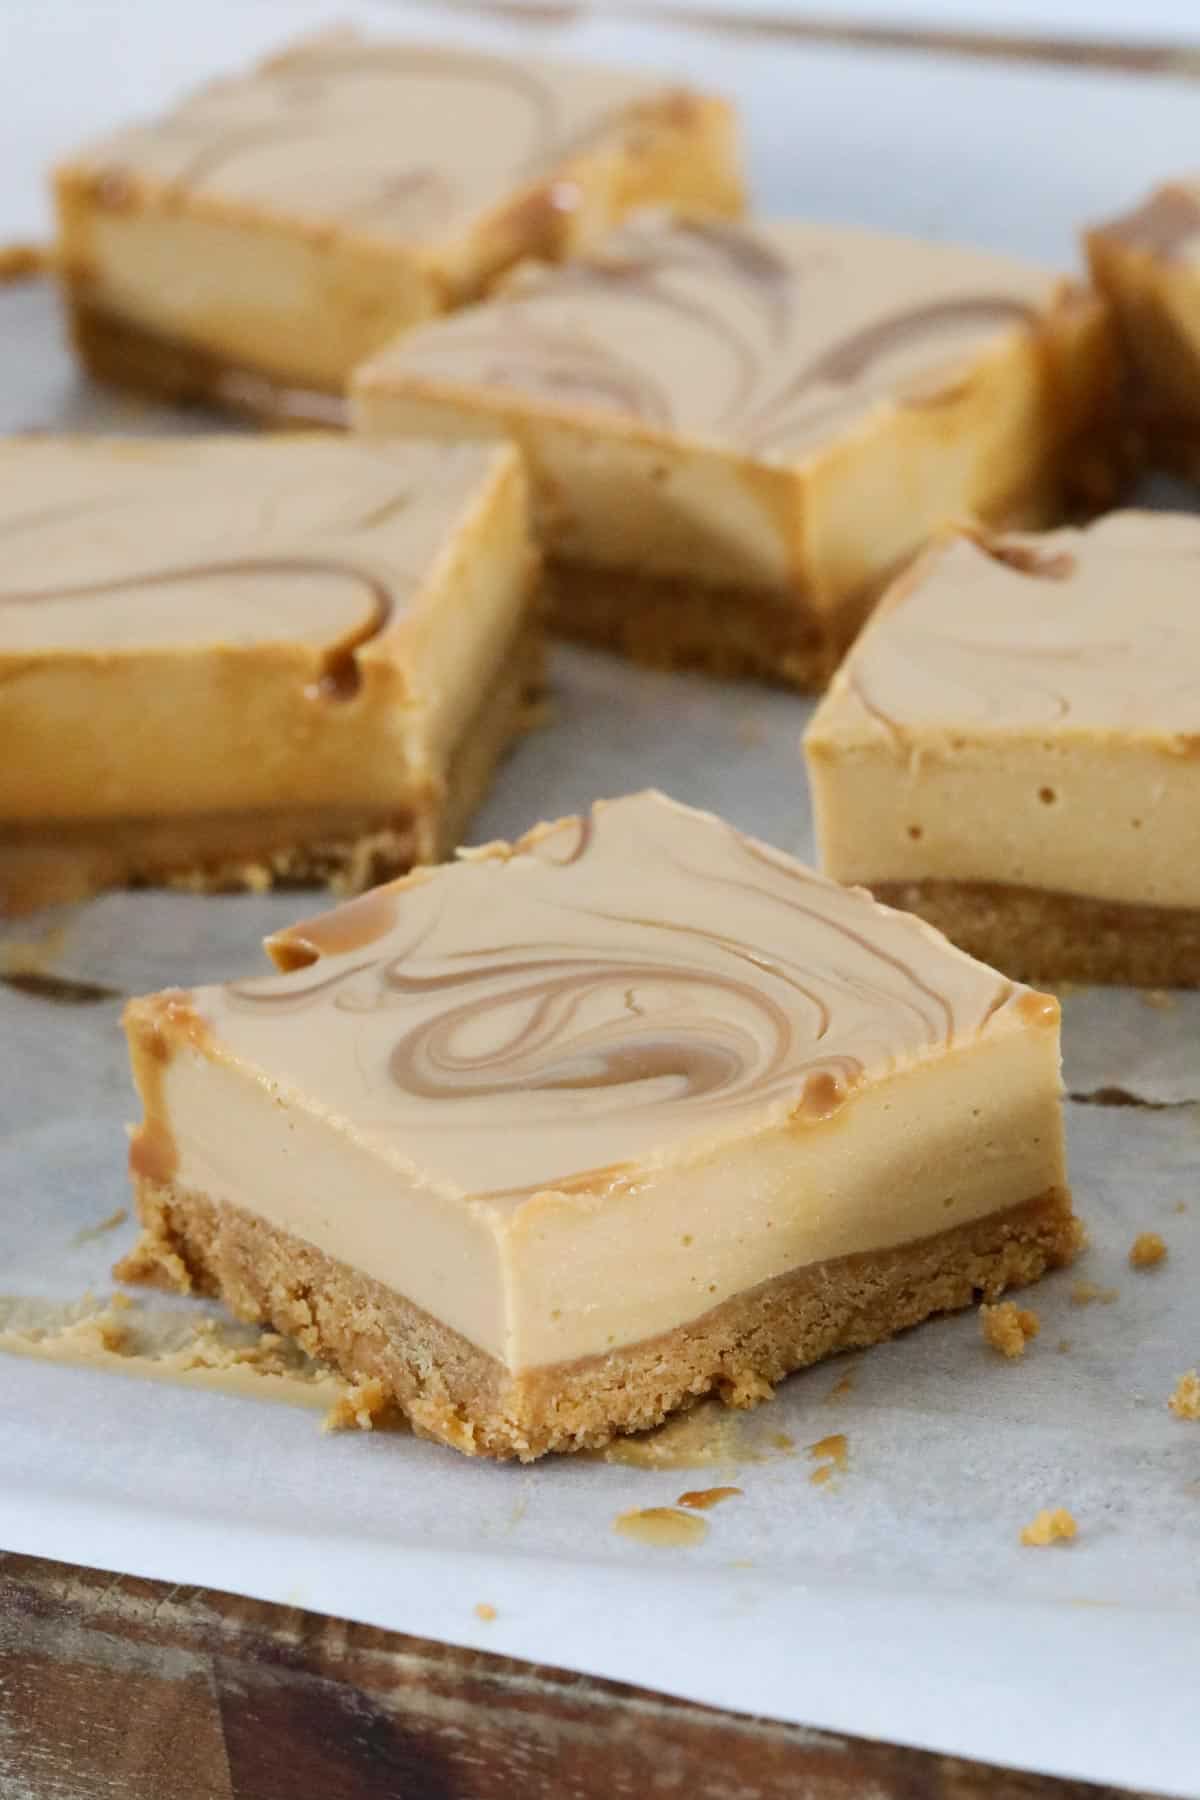 Pieces of creamy caramel bars cut up on a chopping board.